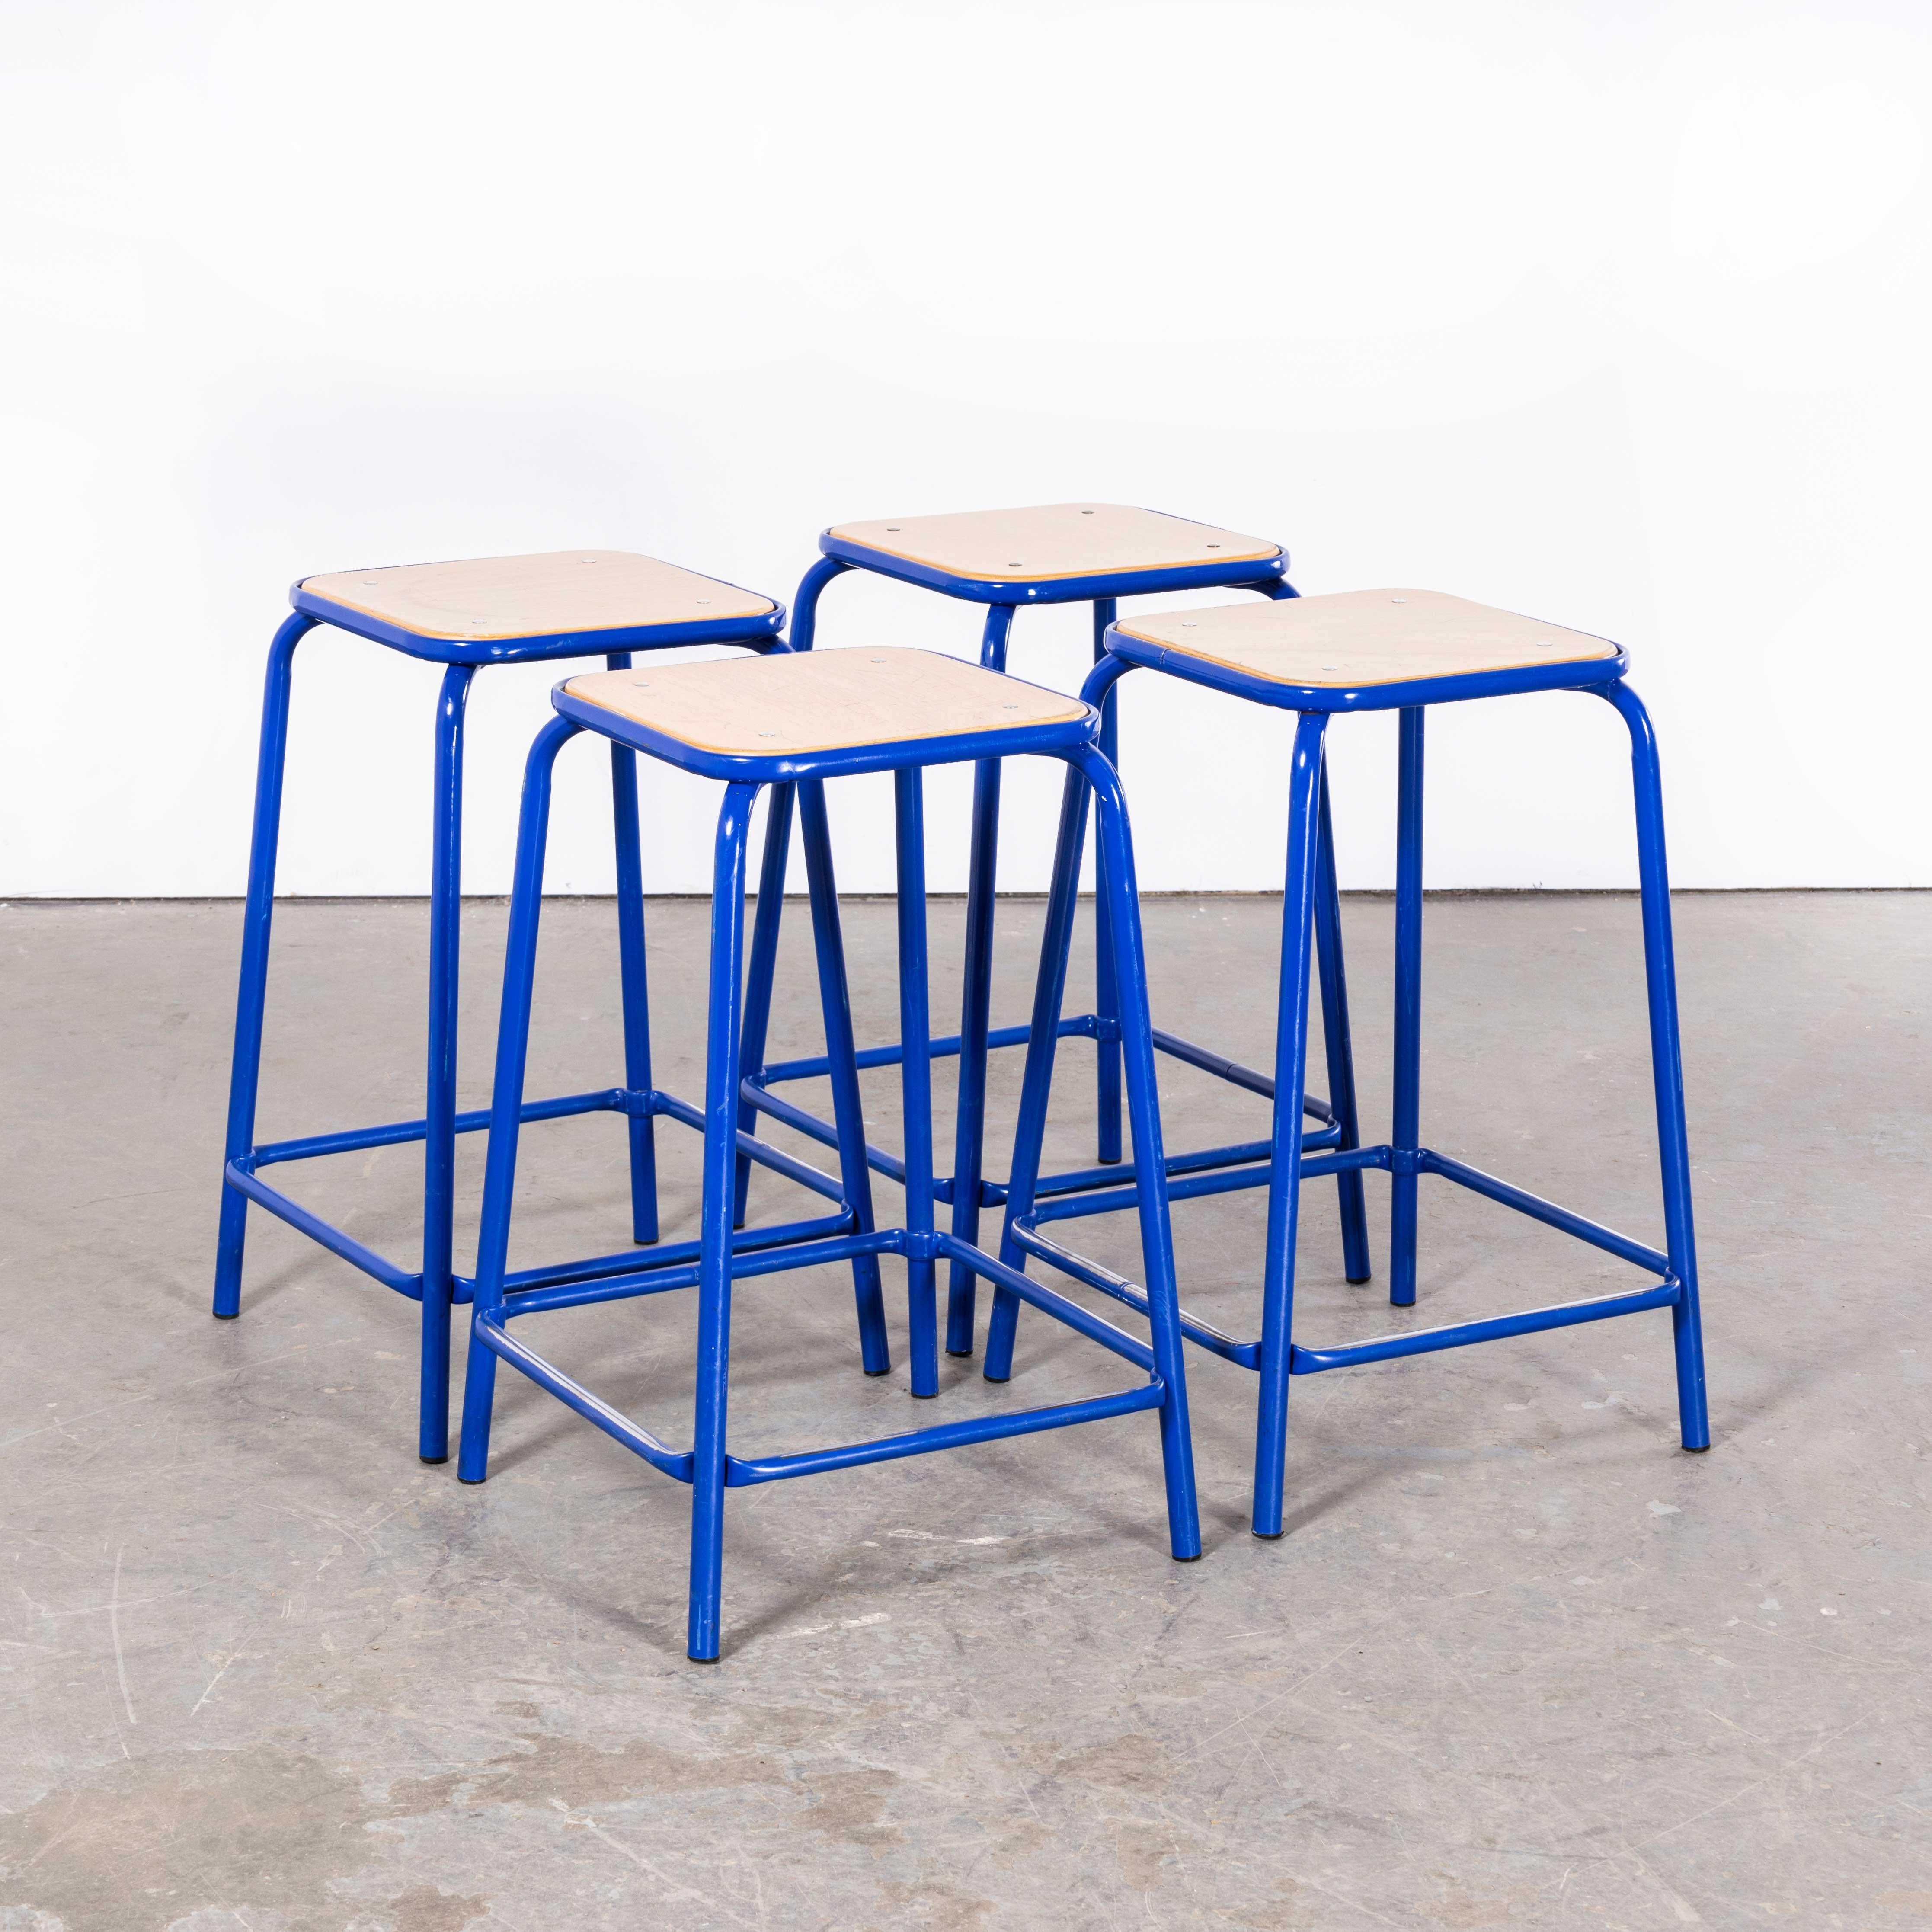 1970’s French Bright Blue Laboratory Stools – Set Of Four
1970’s French Bright Blue Laboratory Stools – Set Of Four. Good honest lab stools, heavy steel frames with solid heavy birch ply seats. We clean them and check all fixings, they are good to